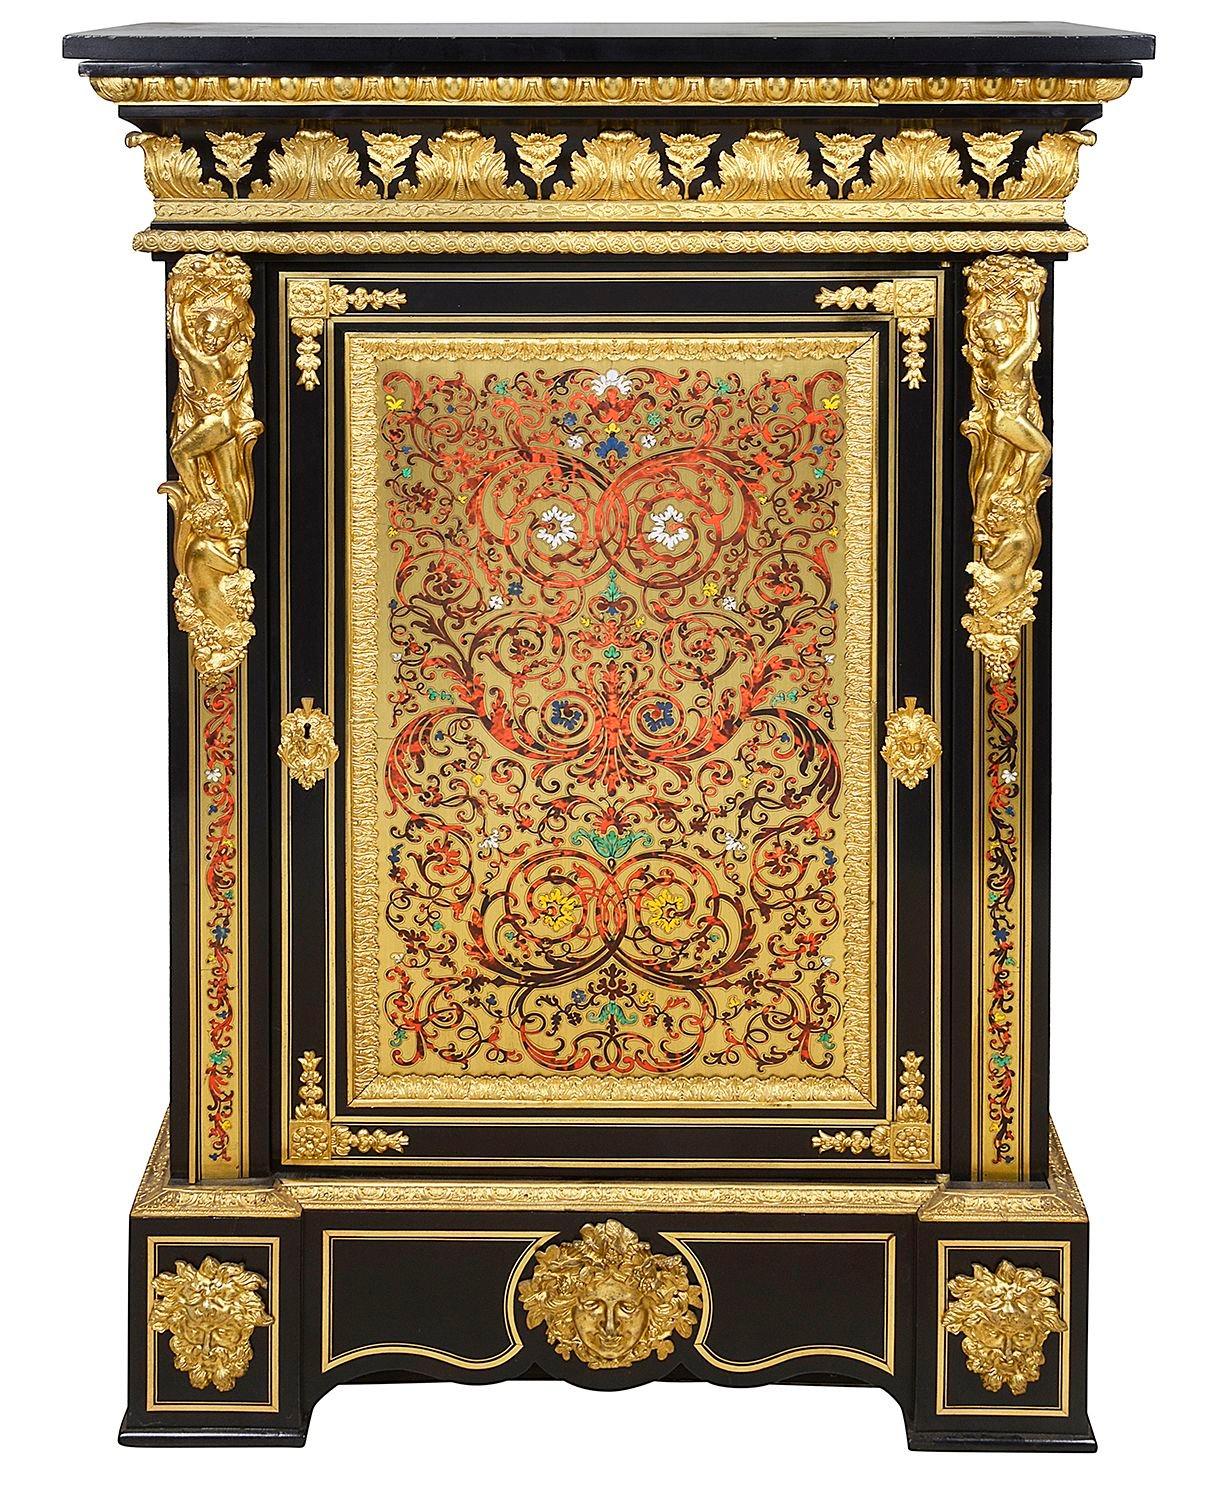 A large and impressive pair of 19th century French Boulle Tortoiseshell inlaid side cabinets, each with their original Belguim black marble tops, wonderful gilded ormolu mounts and mouldings. A pair of classical putti each holding baskets of fruit.